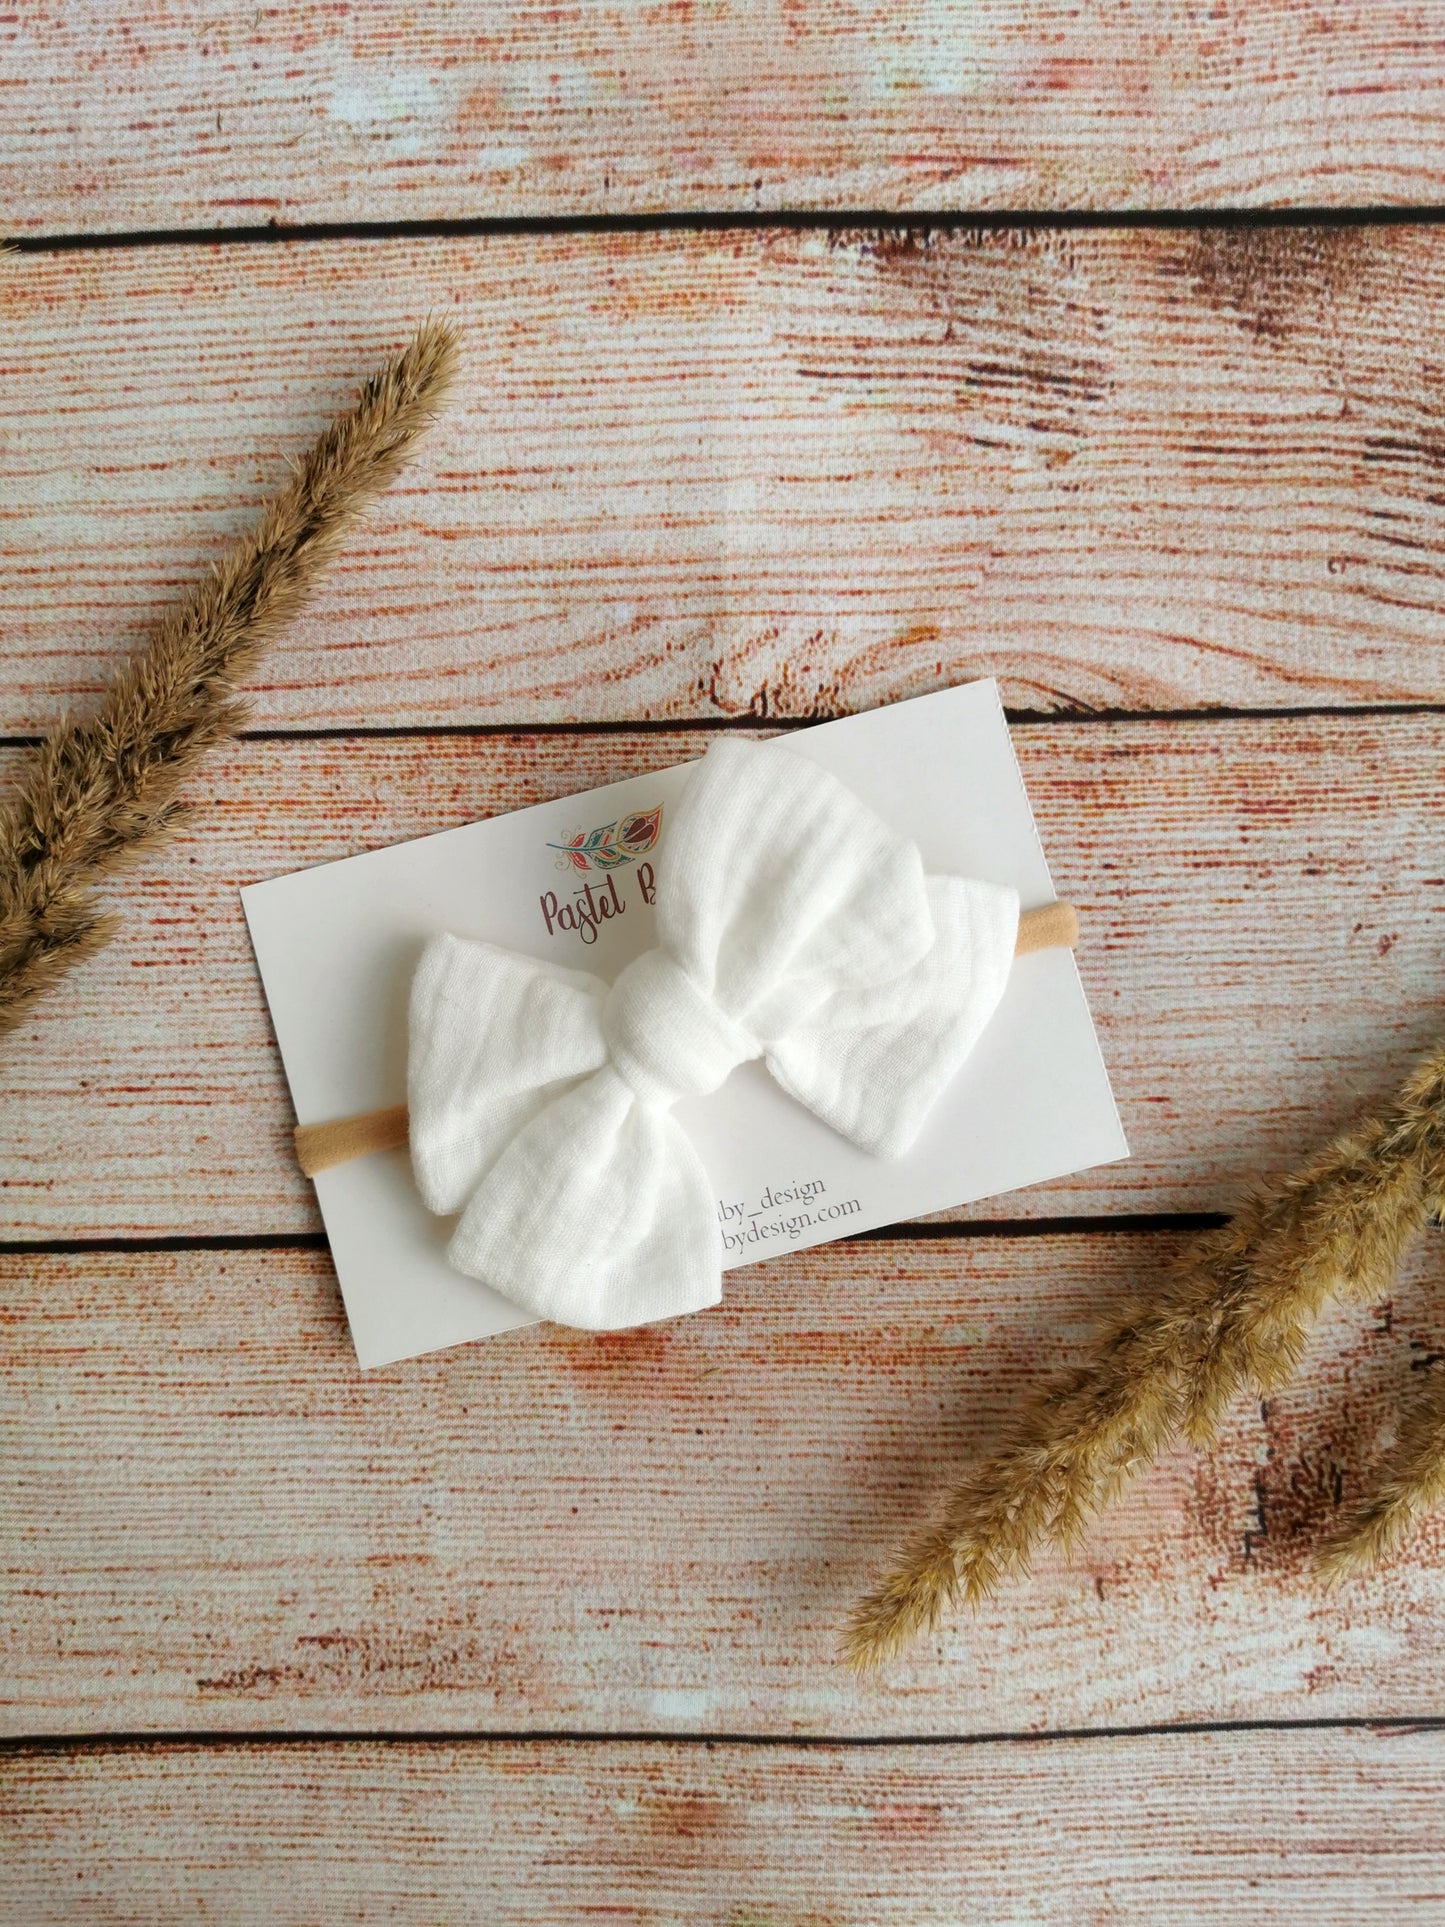 Large cotton headband bow, clip or hair tie - White muslin